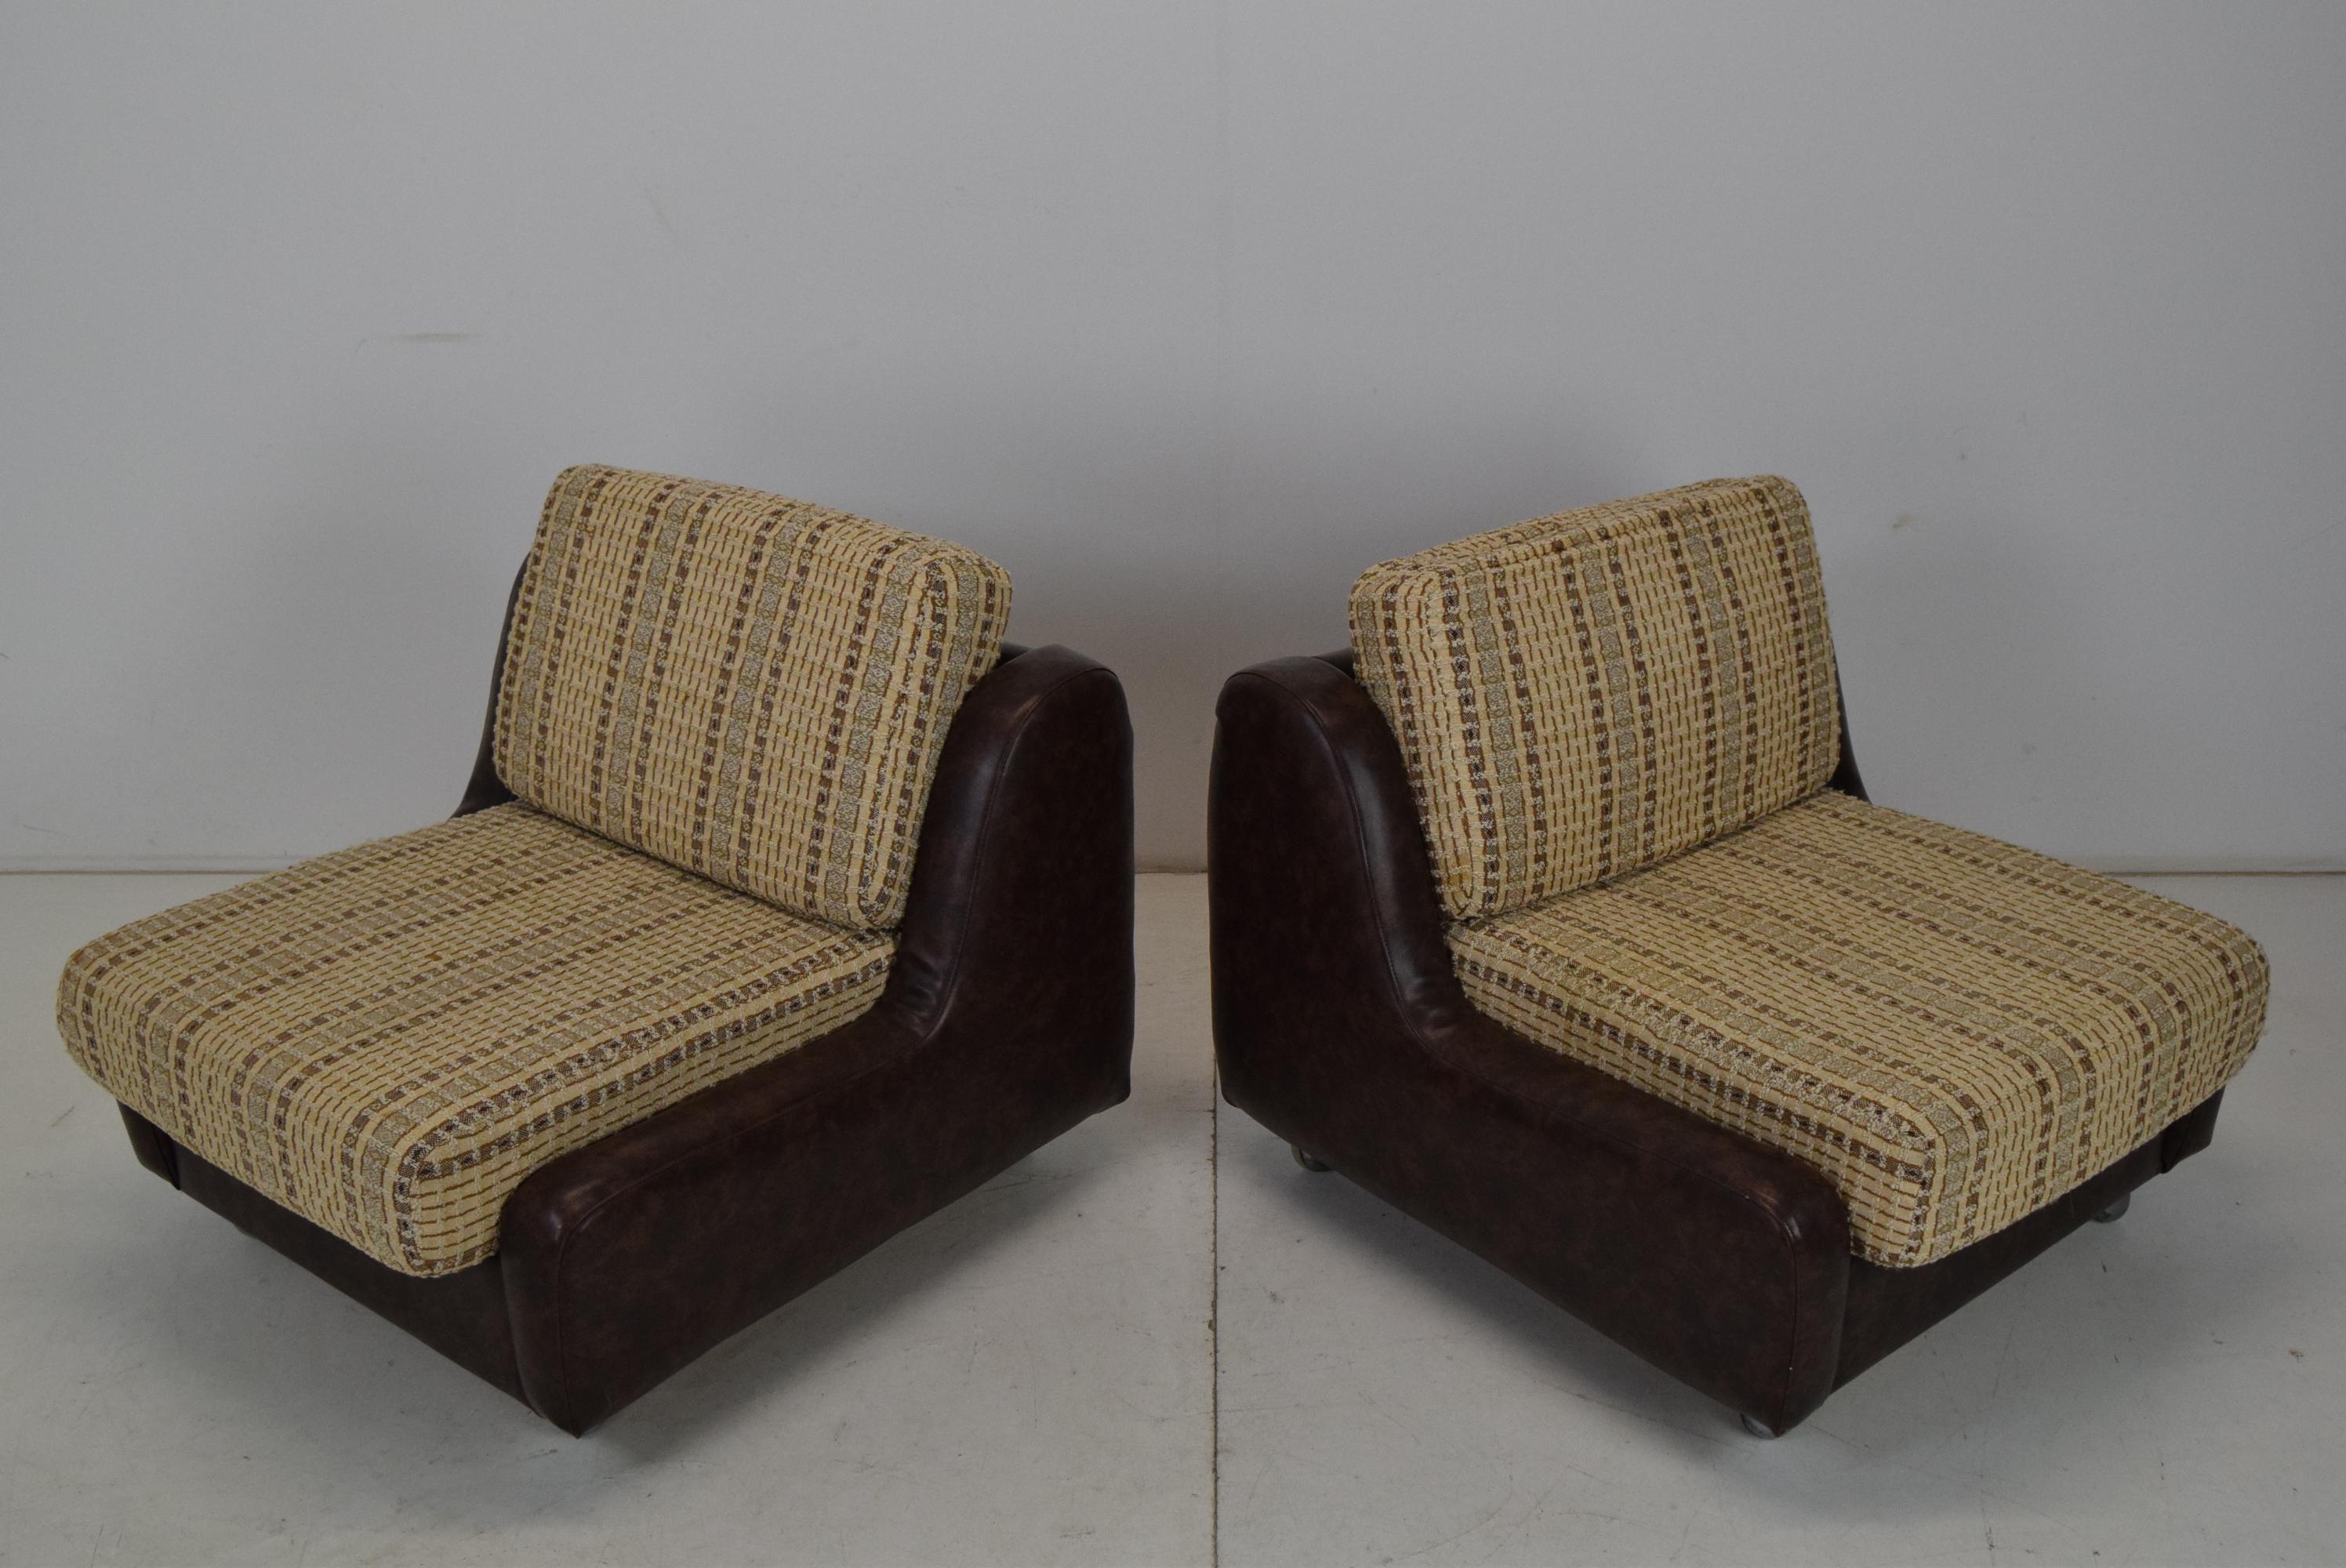 Made in Czechoslovakia
Made of Fabric,Leatherette
Cushions show signs of use
Original condition